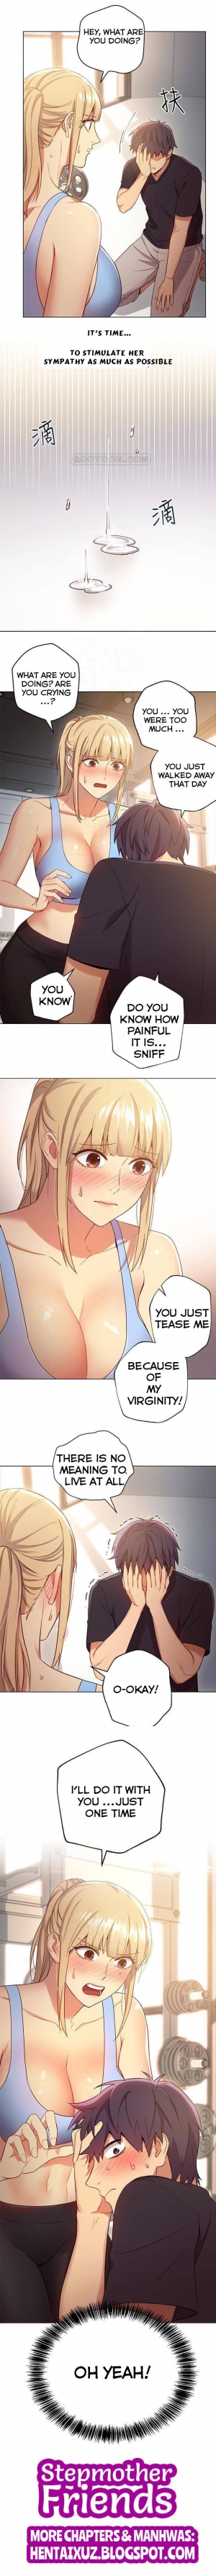  [Neck Pilllow] Stepmother Friends Ch.39/? [English] [Hentai Universe] NEW! 13/10/2020  - Page 114